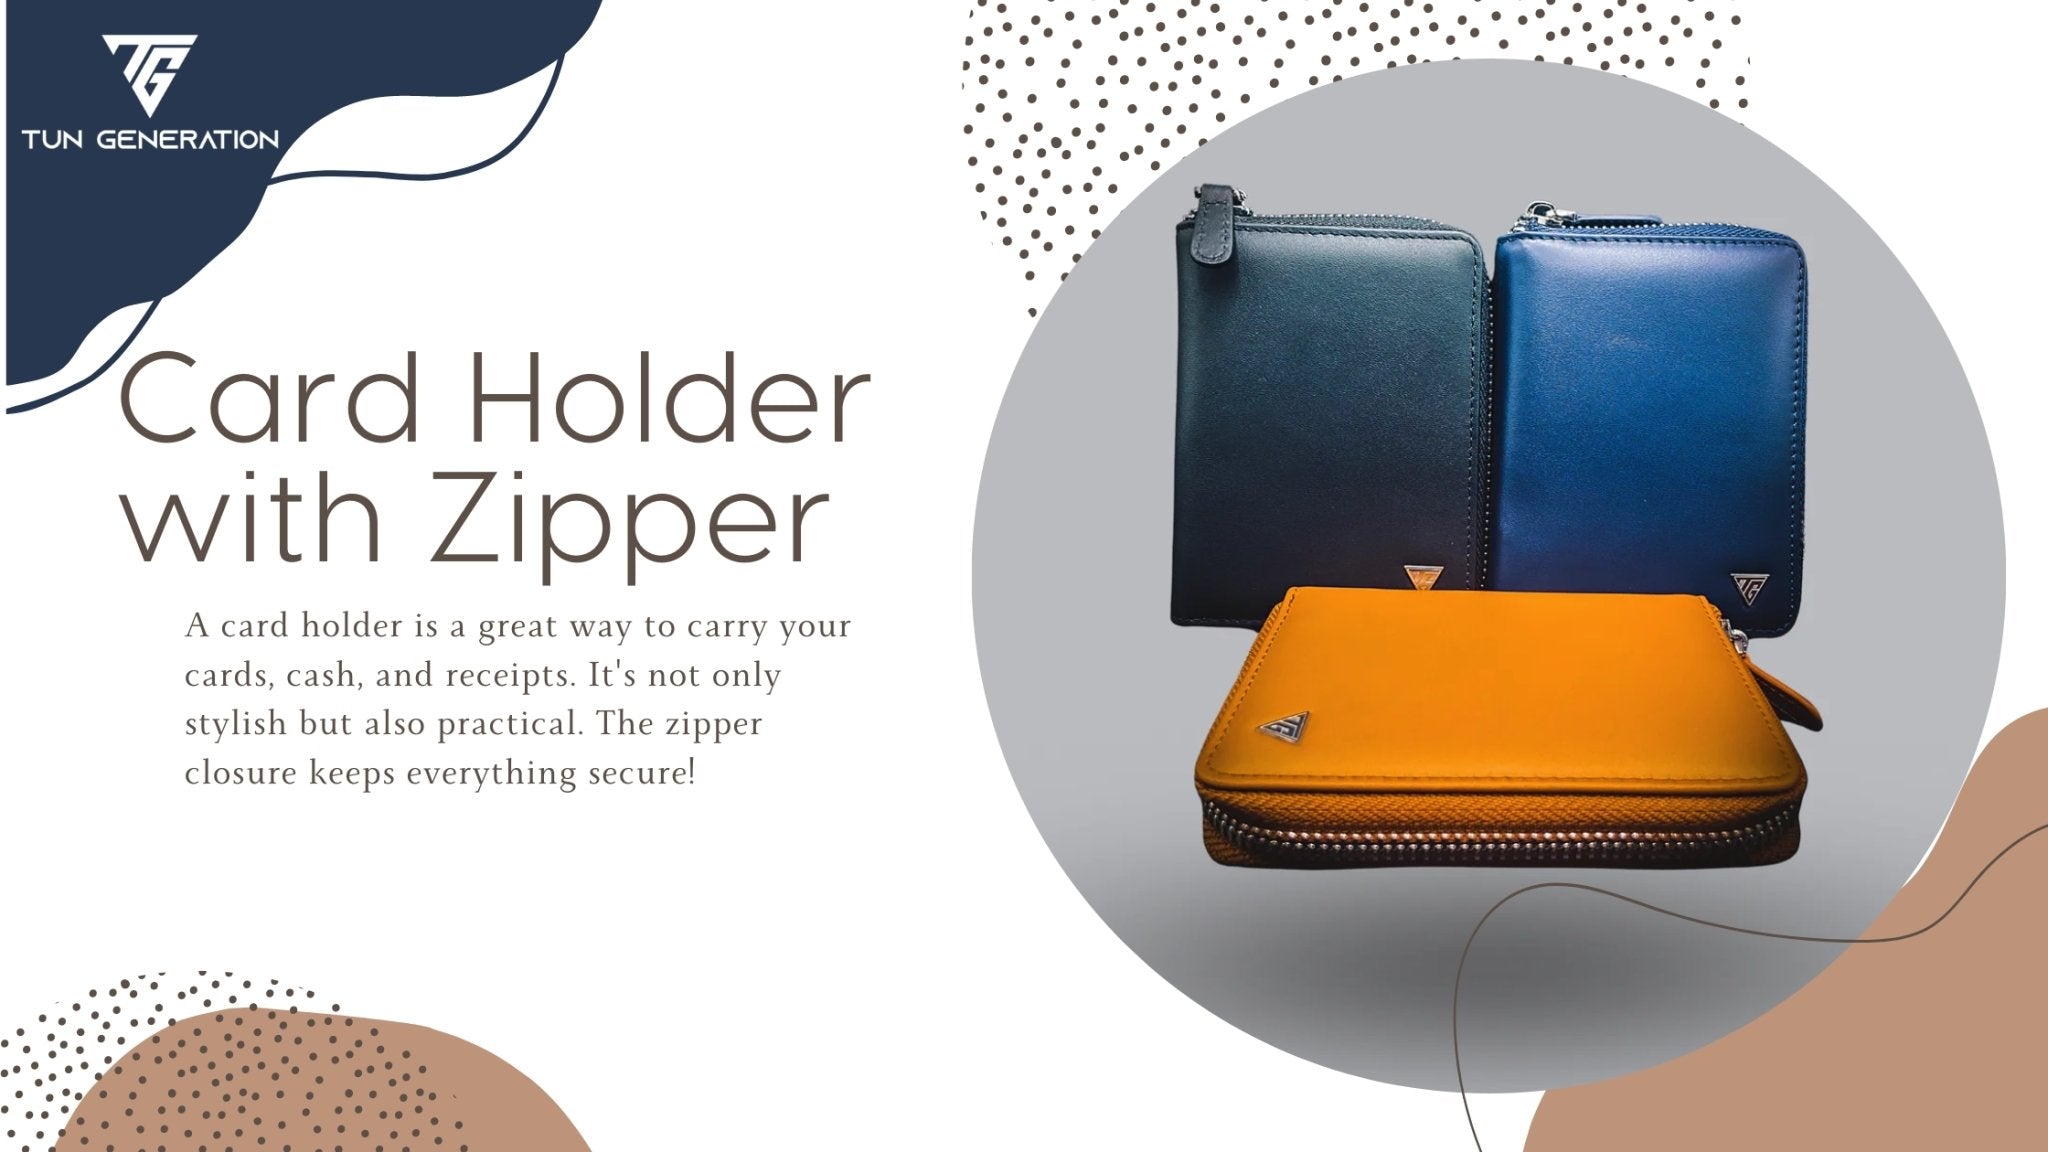 Never Lose Your Cards Again with a Card Holder with Zipper - Tun Generation